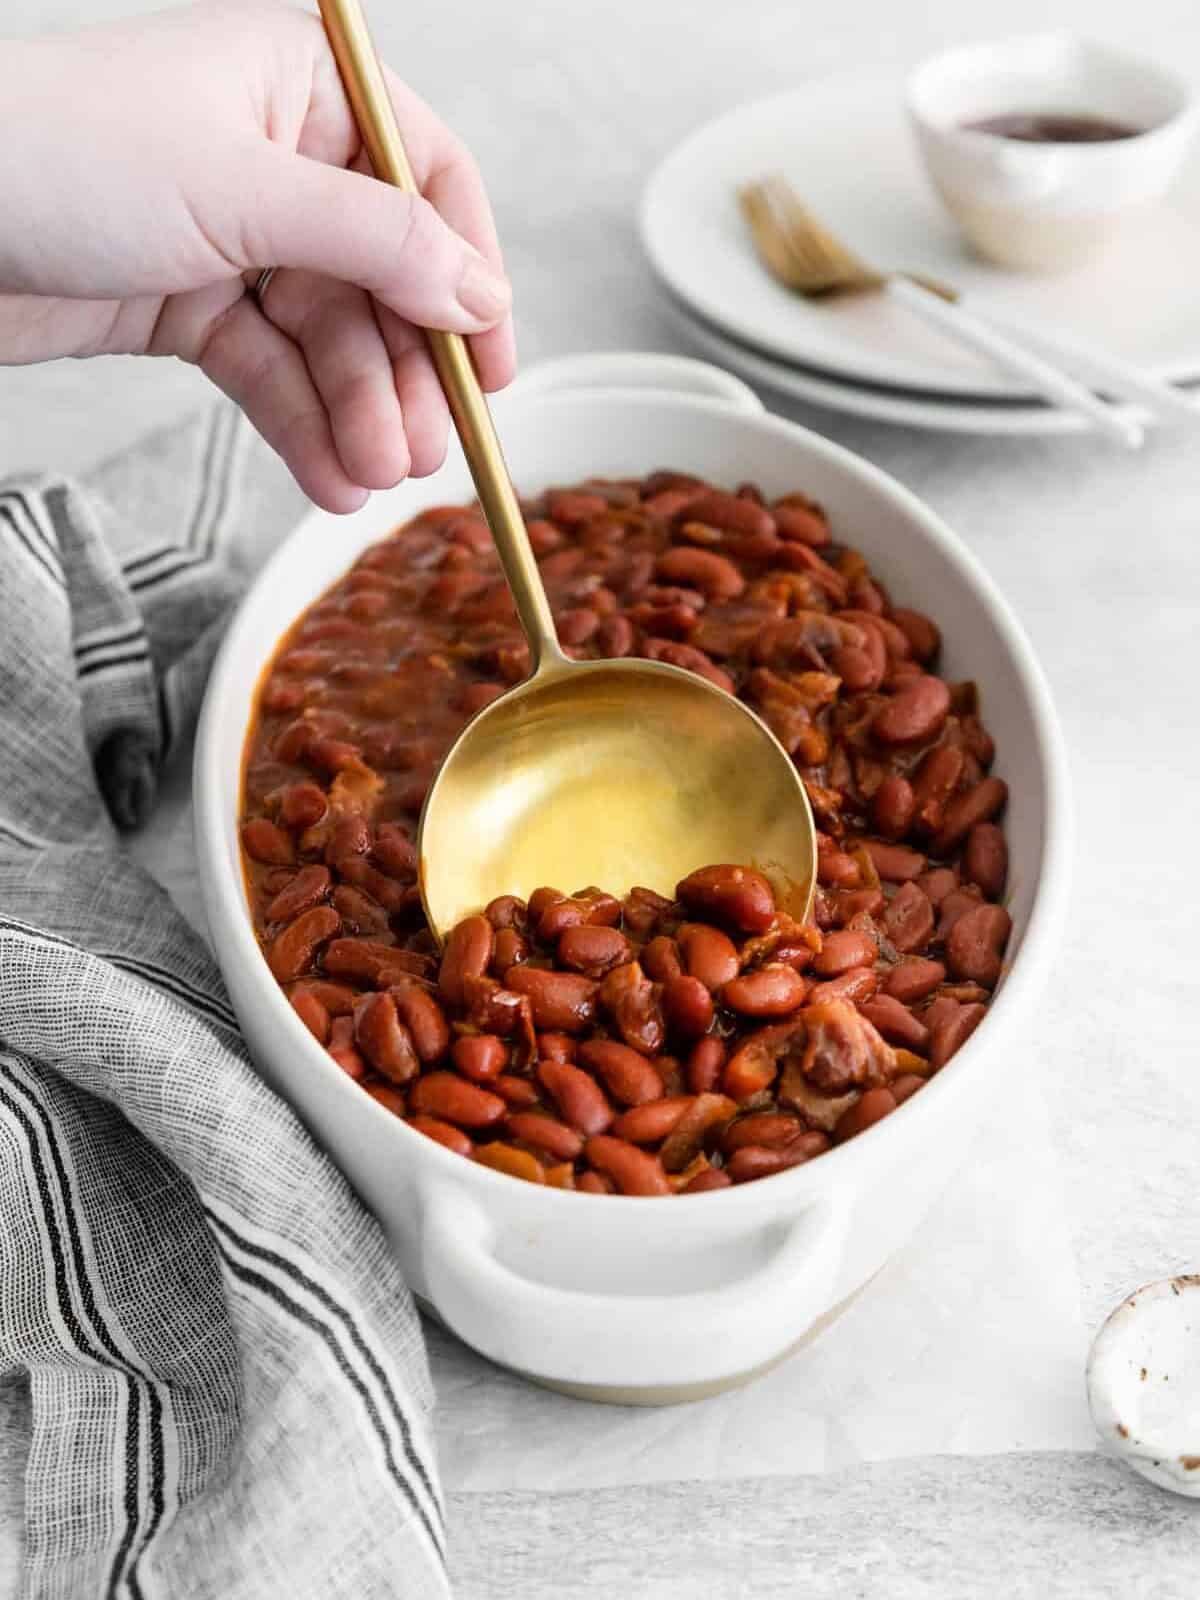 a hand using a spoon to scoop instant pot bbq baked beans from a white serving dish.